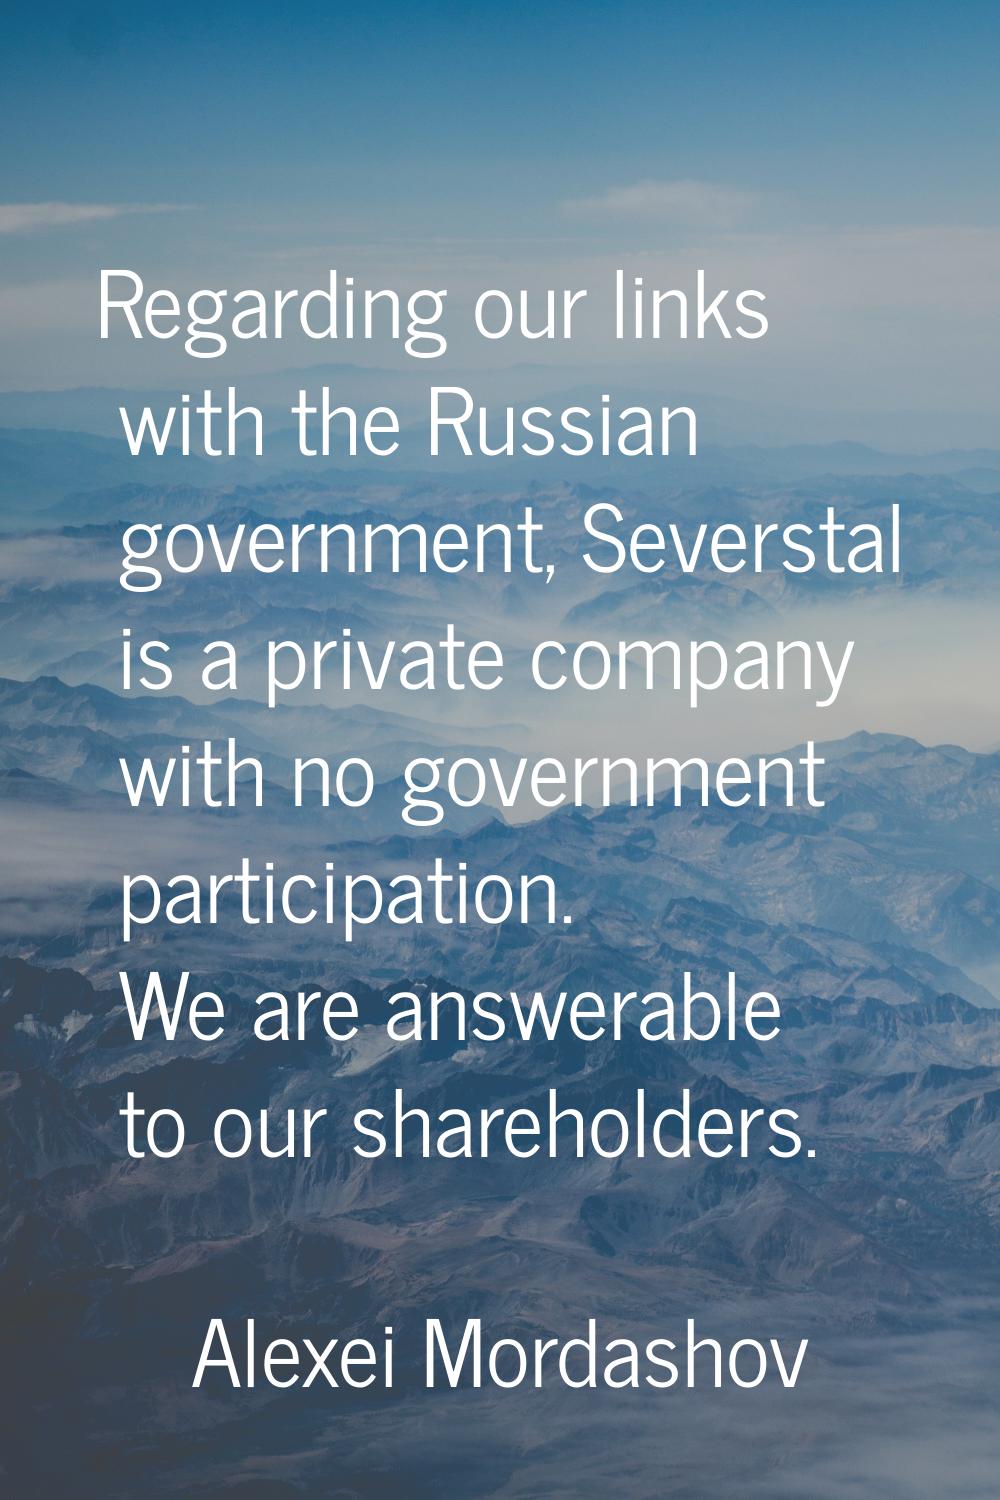 Regarding our links with the Russian government, Severstal is a private company with no government 